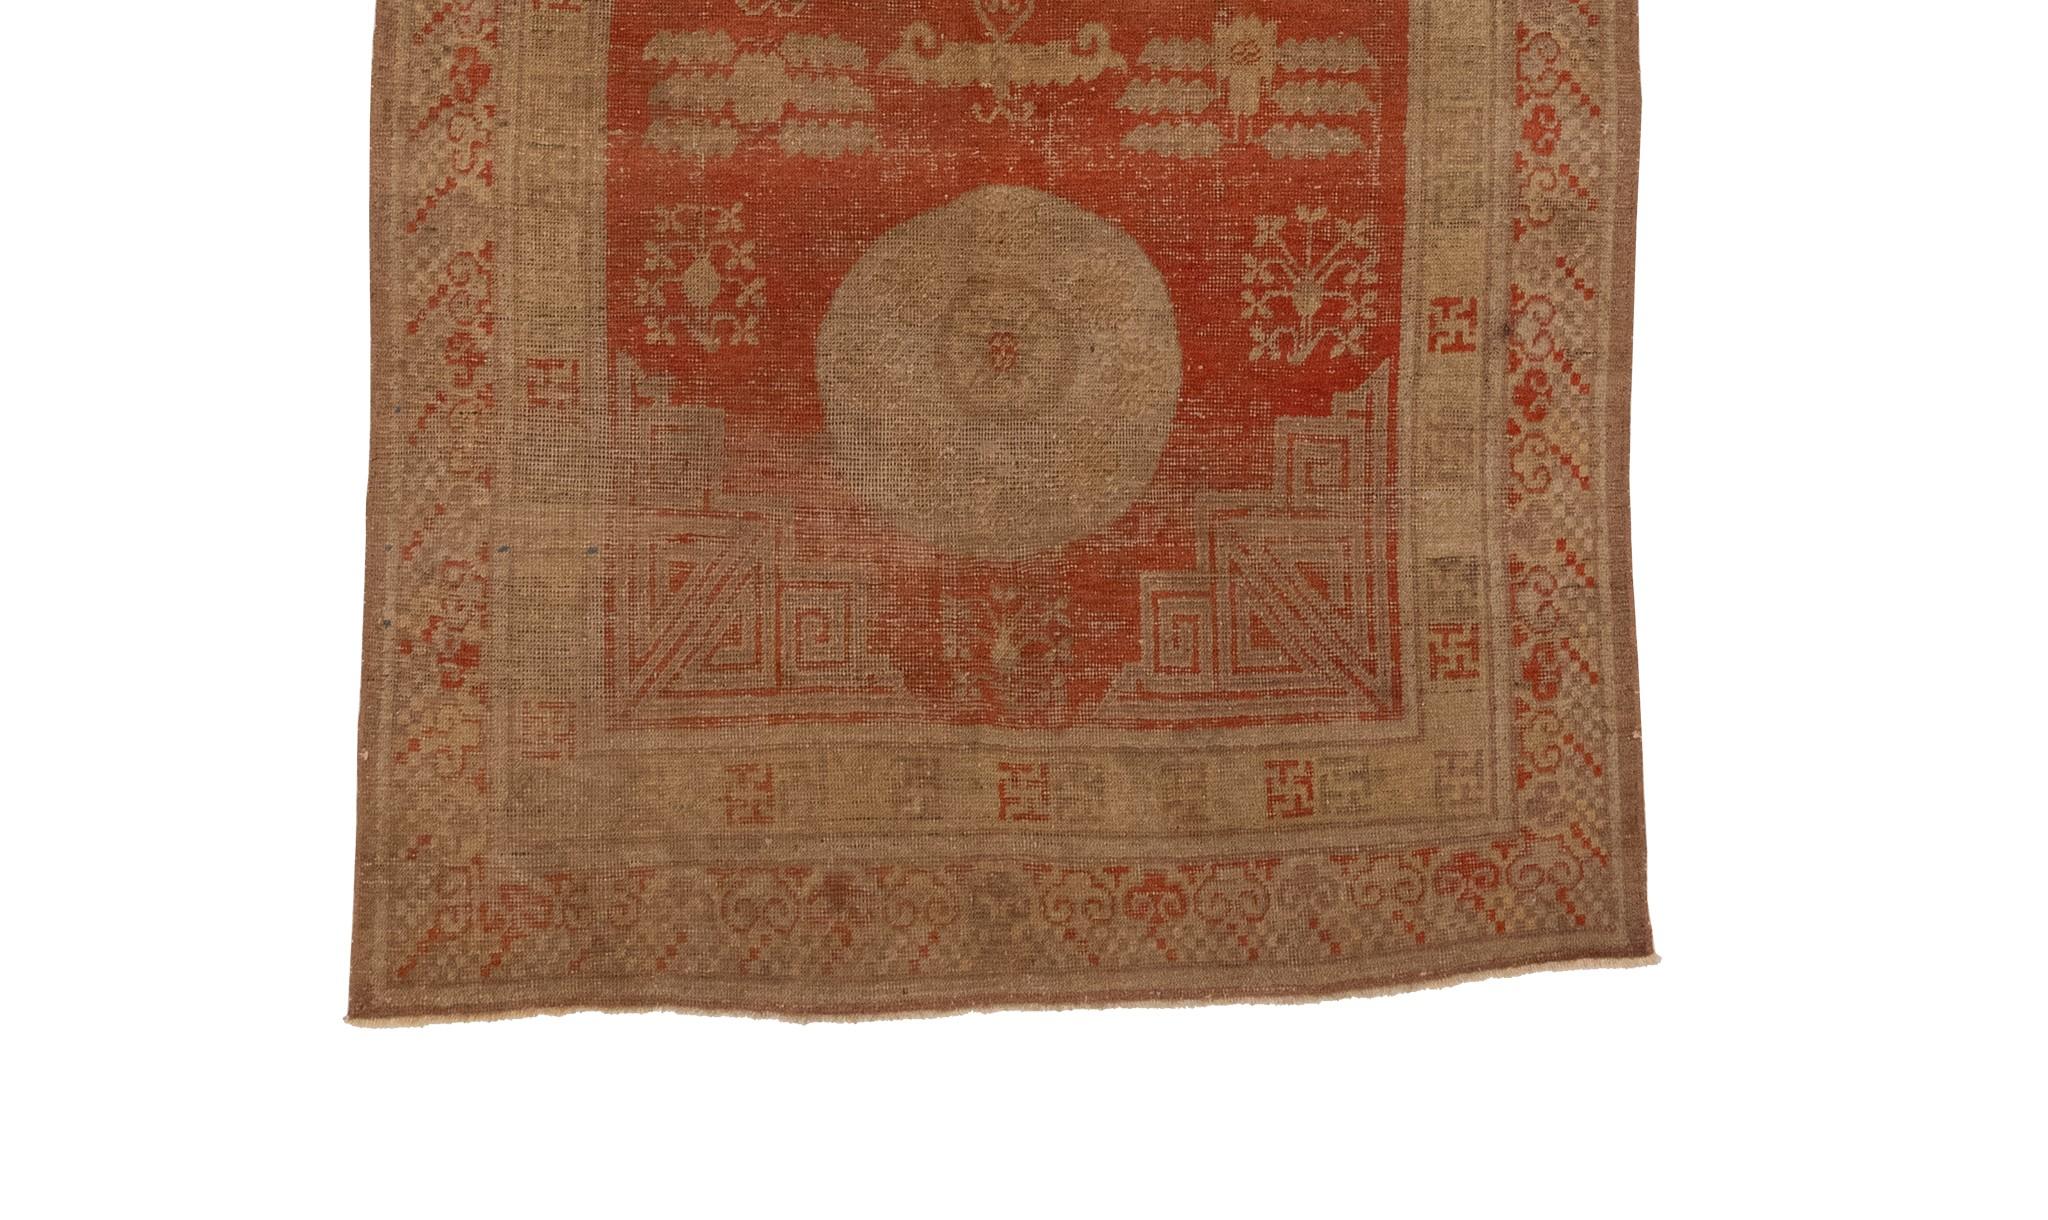 Here we have an antique Khotan rug from East Turkistan, made around 1900. This rug is a stunning example of the early rugs created in this area. It features three captivating circular medallions, each with a unique design and placement that adds to